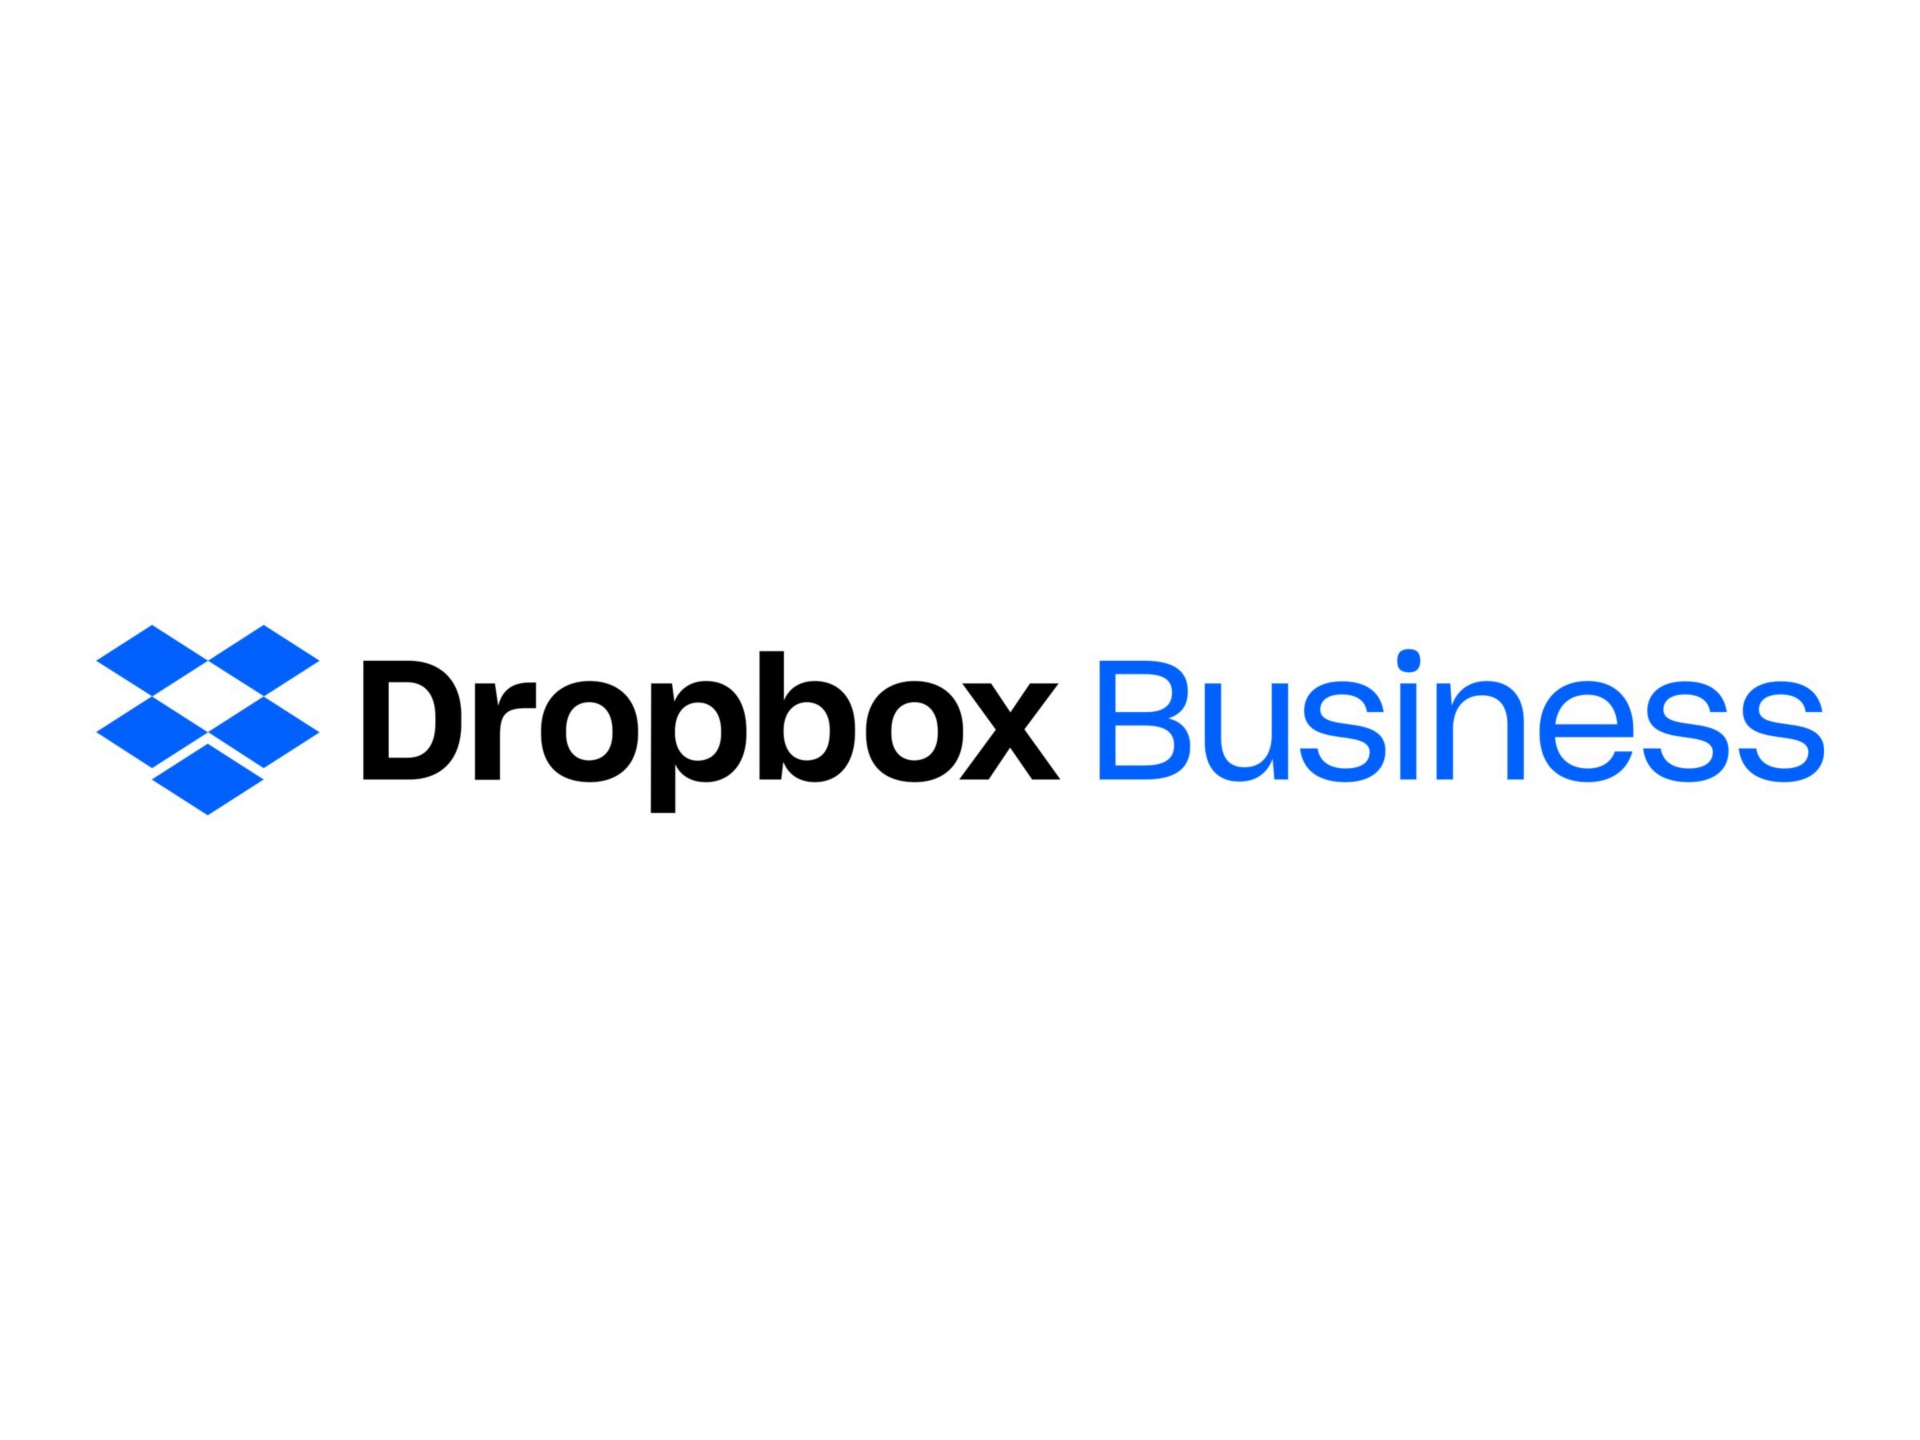 Dropbox Business Advanced - subscription upgrade license (9 months) - 1 use